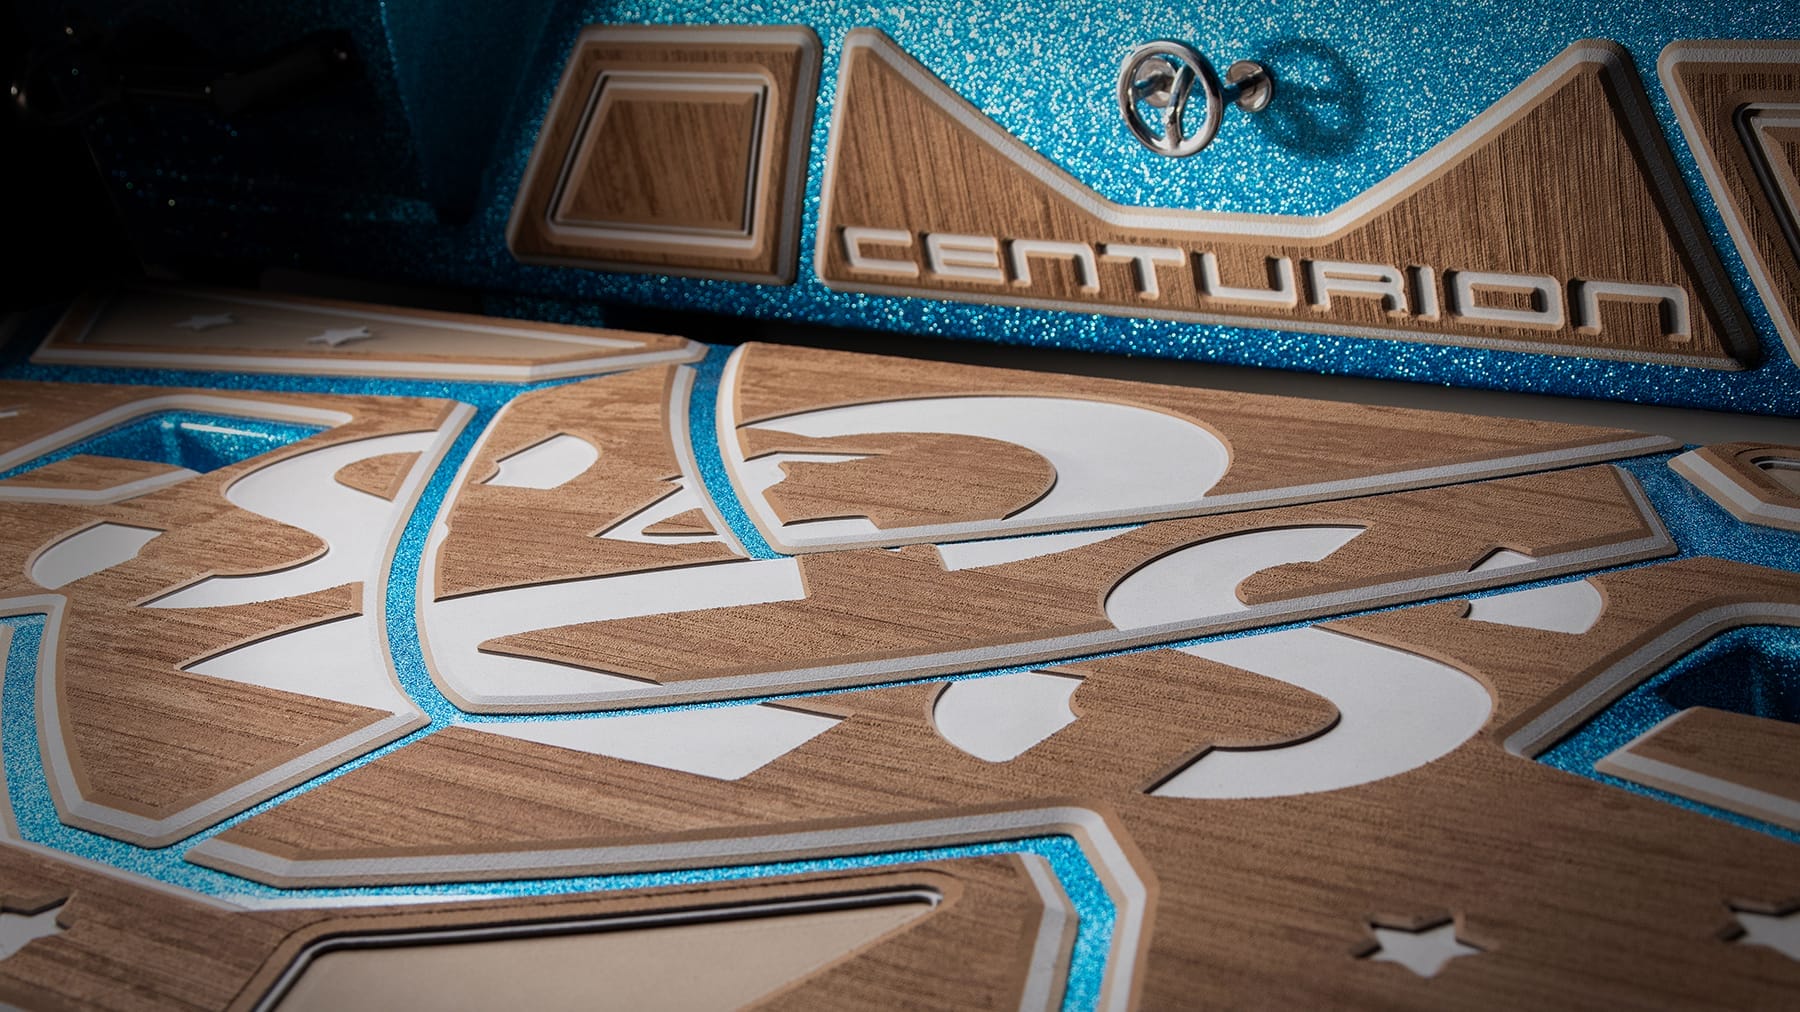 Close-up of a Centurion logo on a boat with a detailed wooden design and blue metal accents.